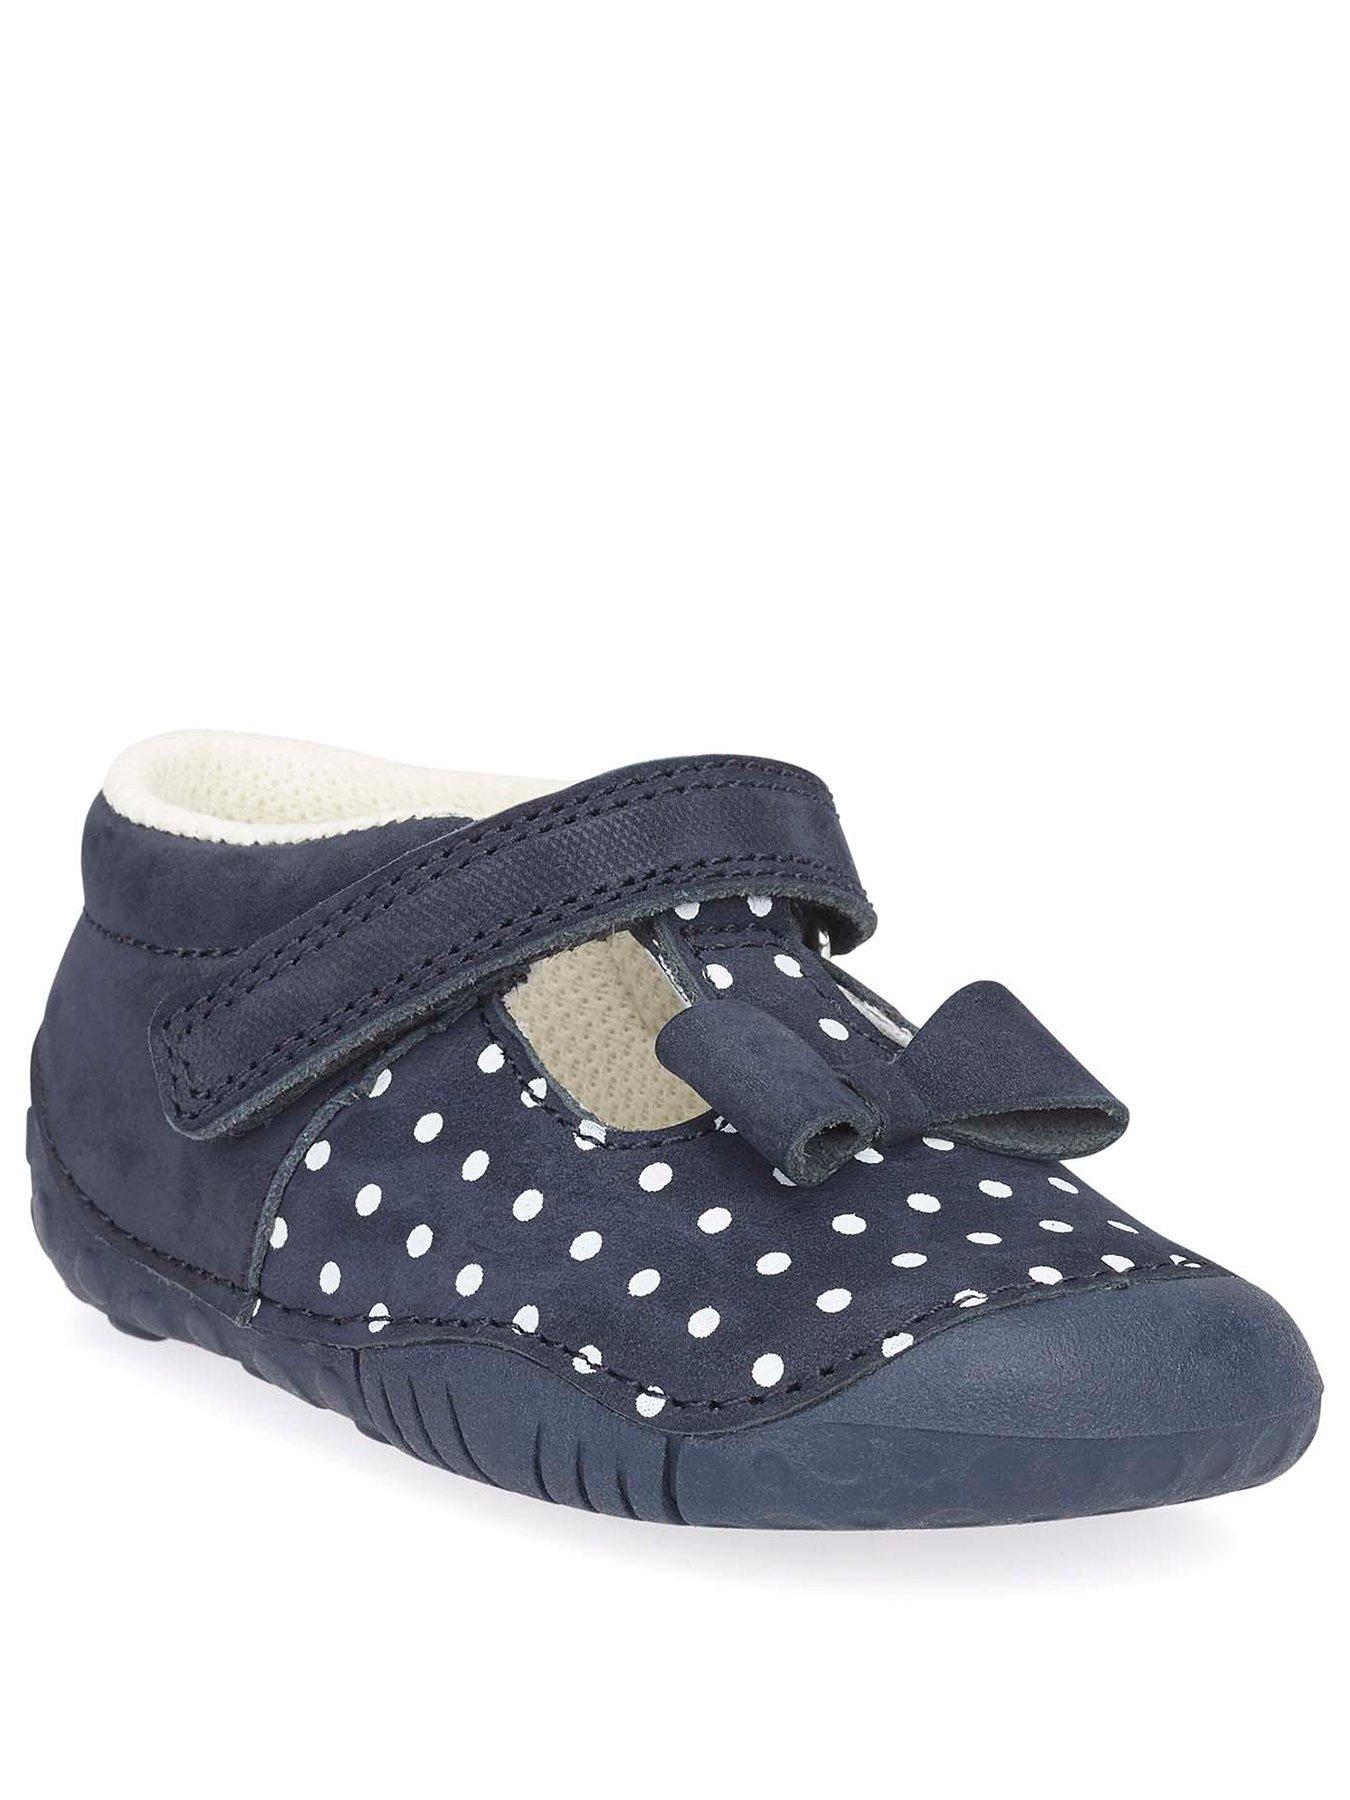 navy blue baby girl shoes